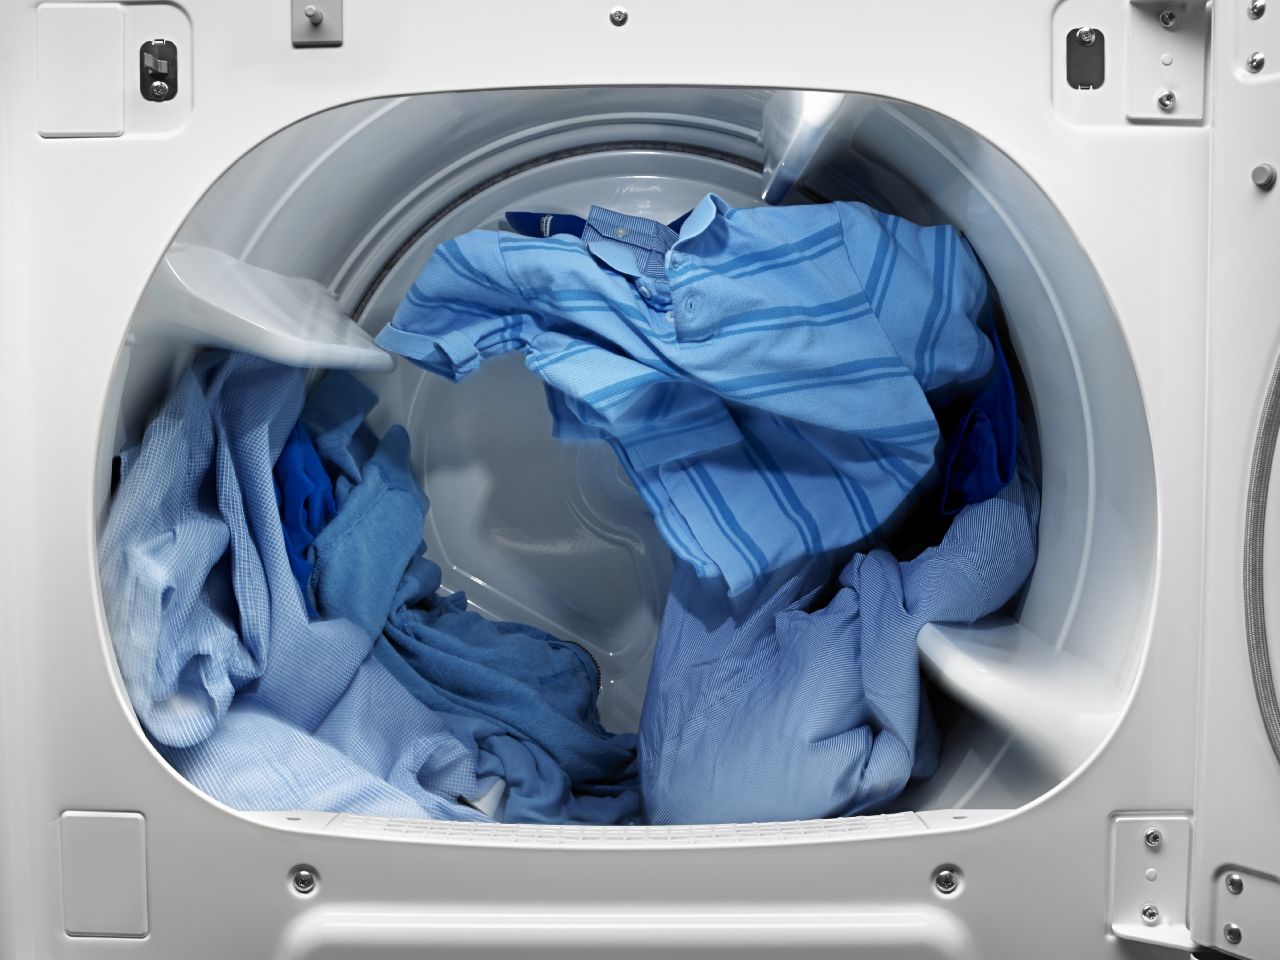 How To Avoid Harming Your Maytag Dryer